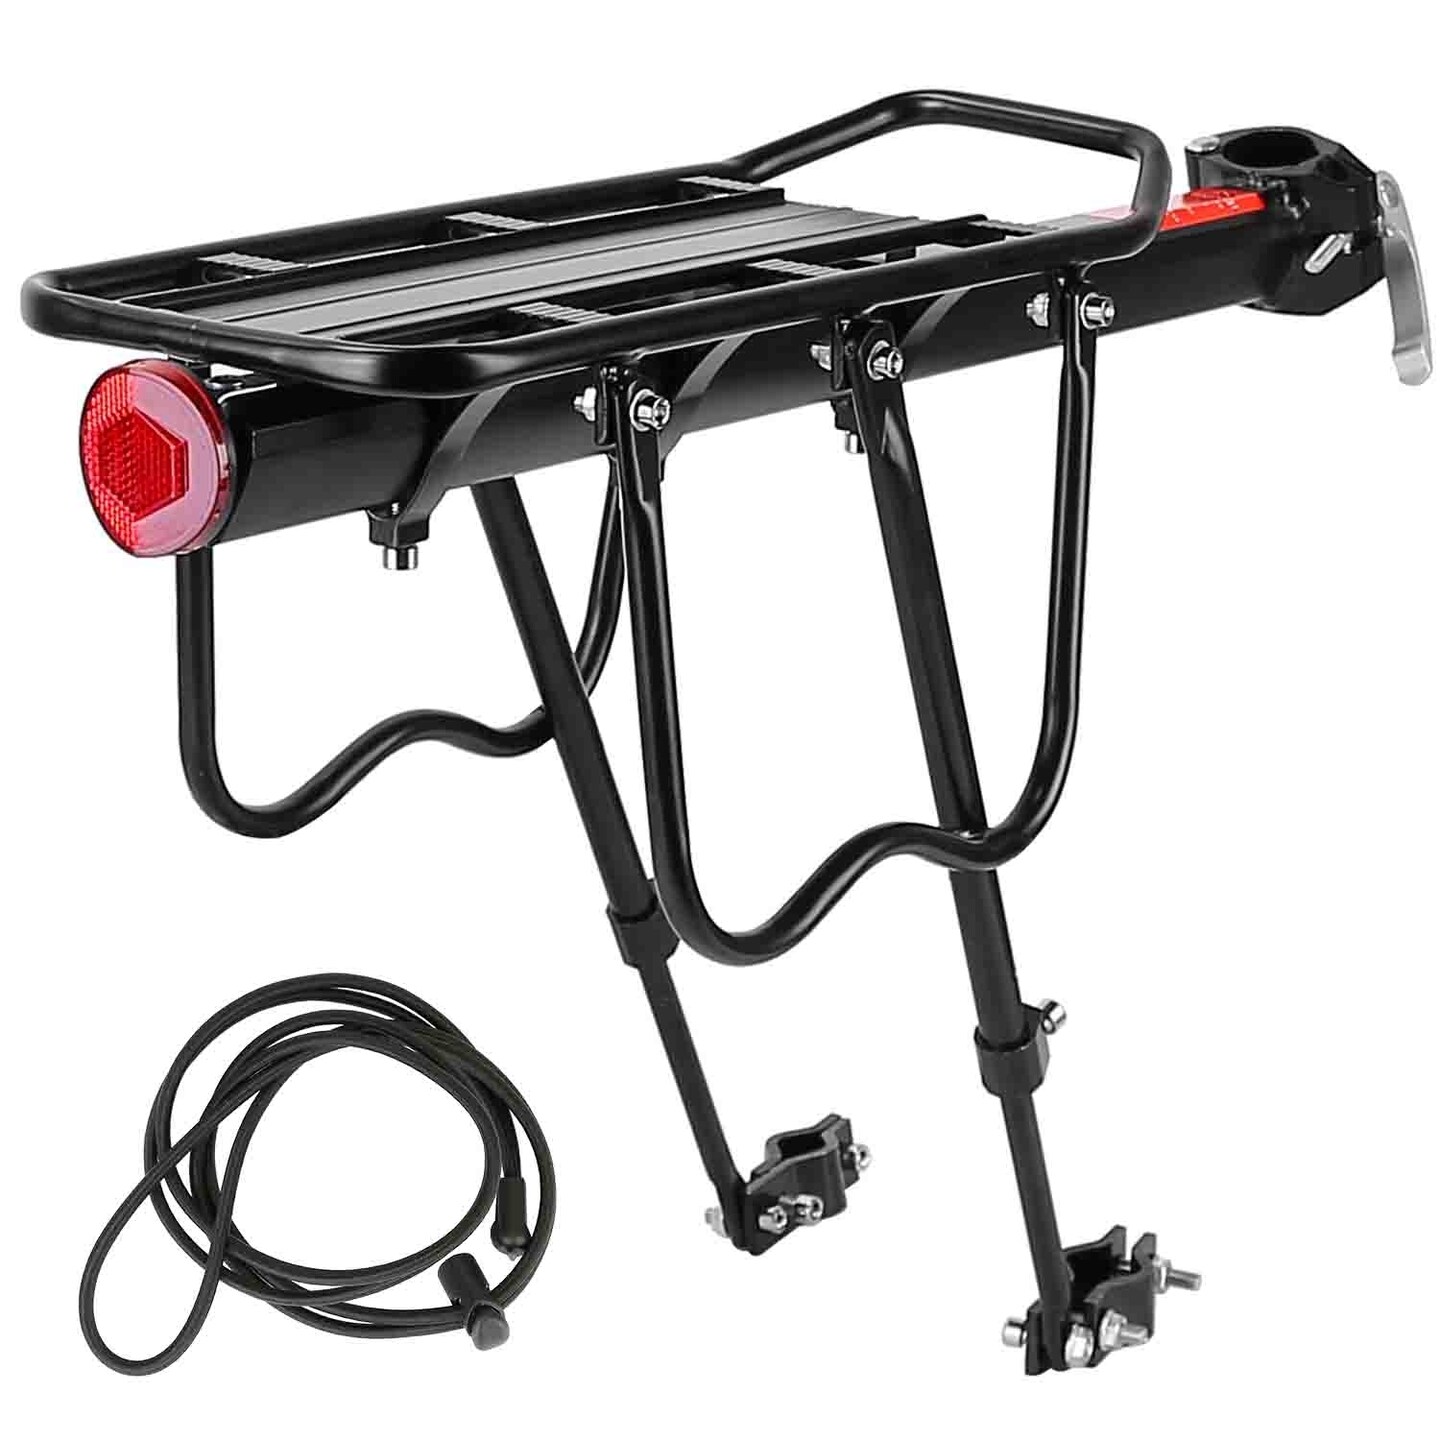 Global Phoenix Bike Cargo Rack Adjustable Bicycle Rear Rack Cycling Luggage Carrier with Elastic Cord Red Reflector 55LBS Load Capacity